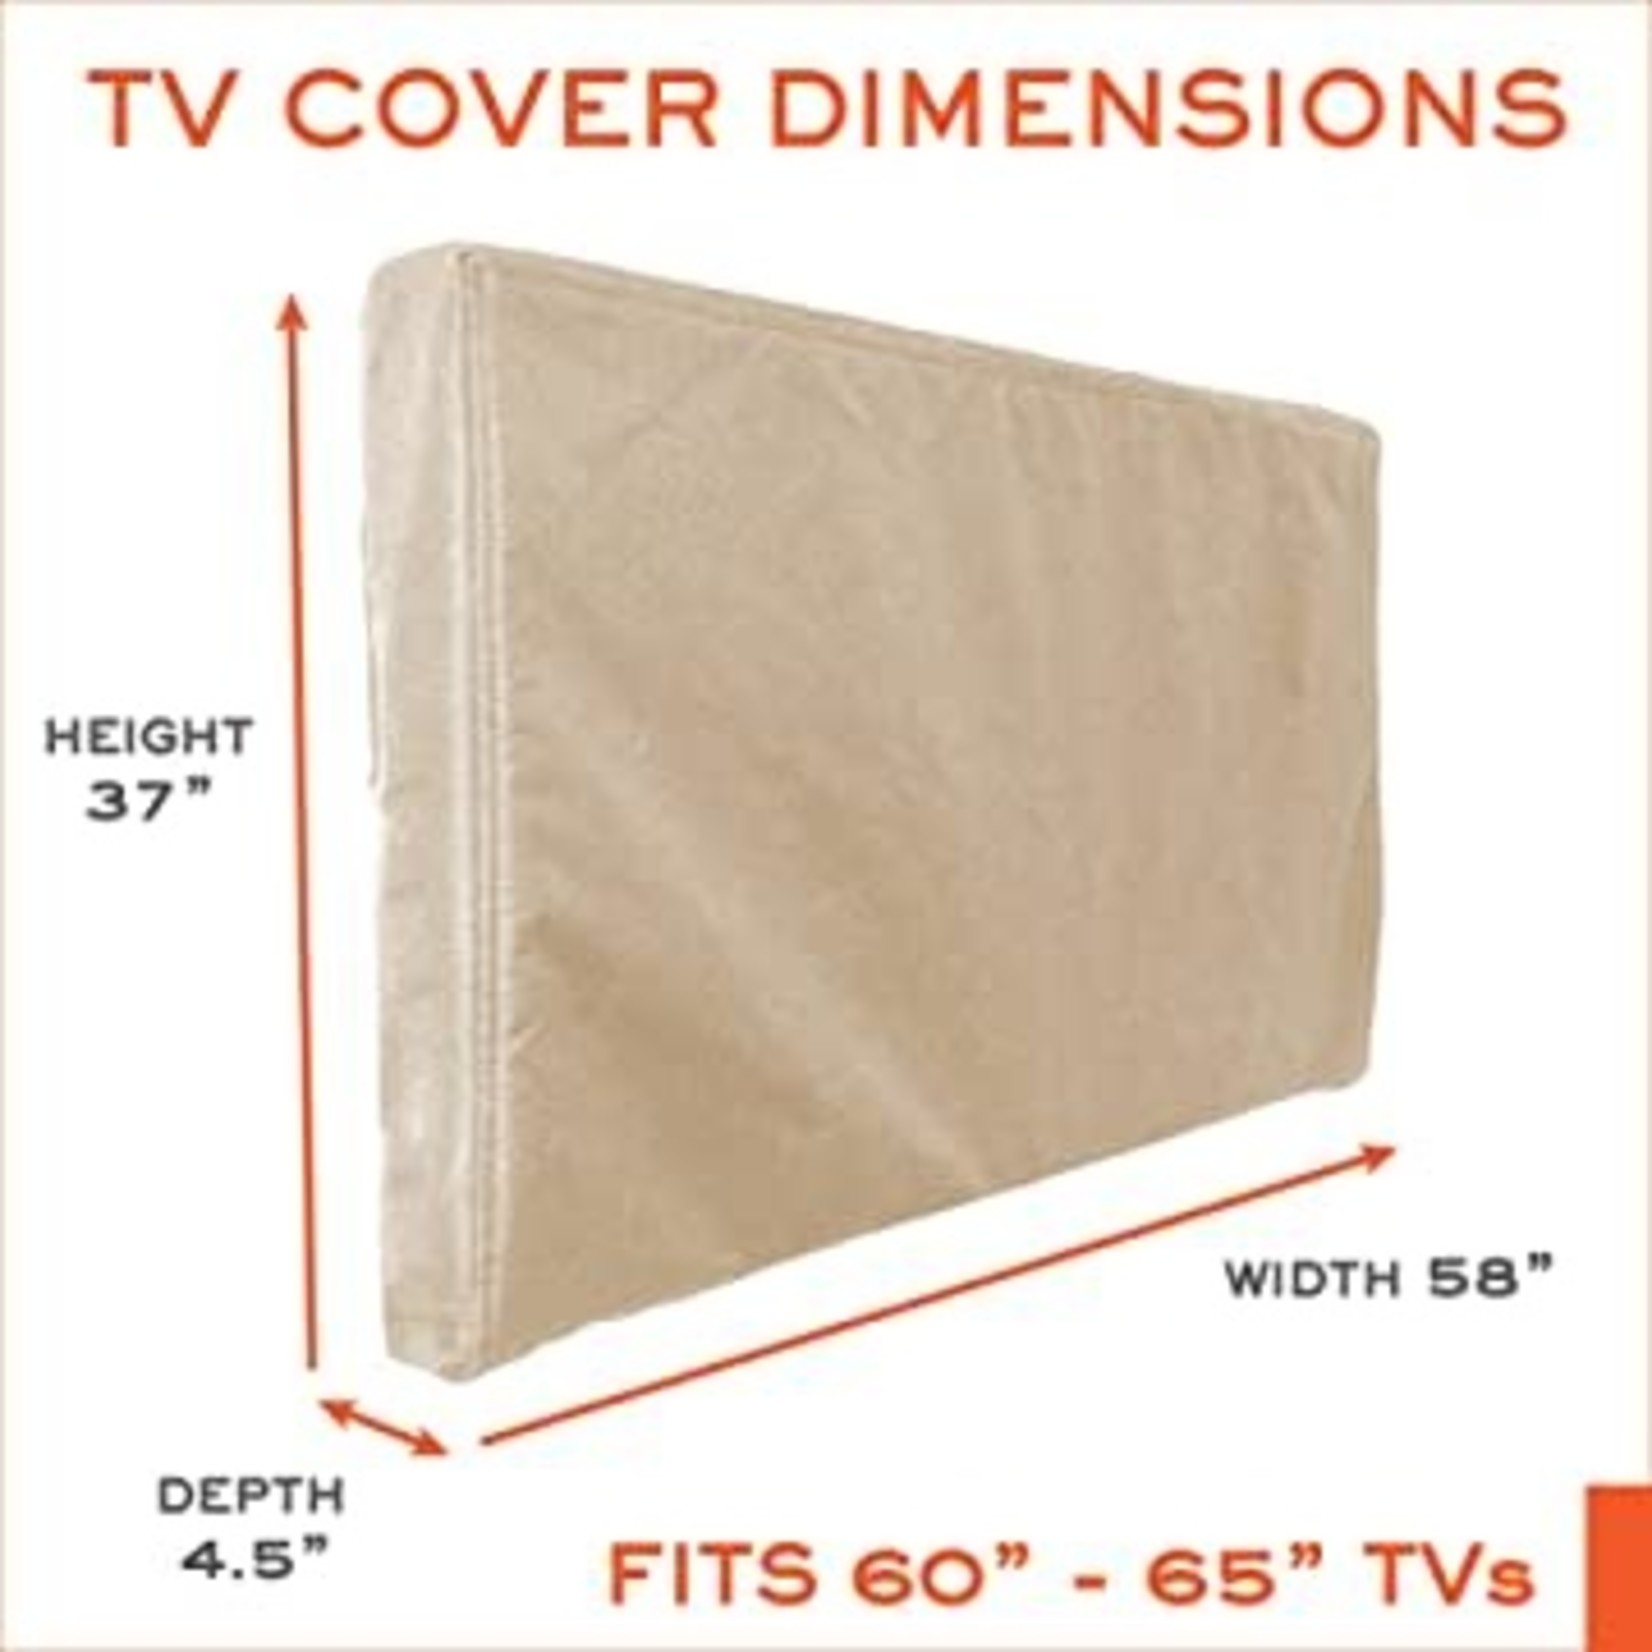 Bozzcovers 60" - 65" - Outdoor TV Cover with Zipper- Beige